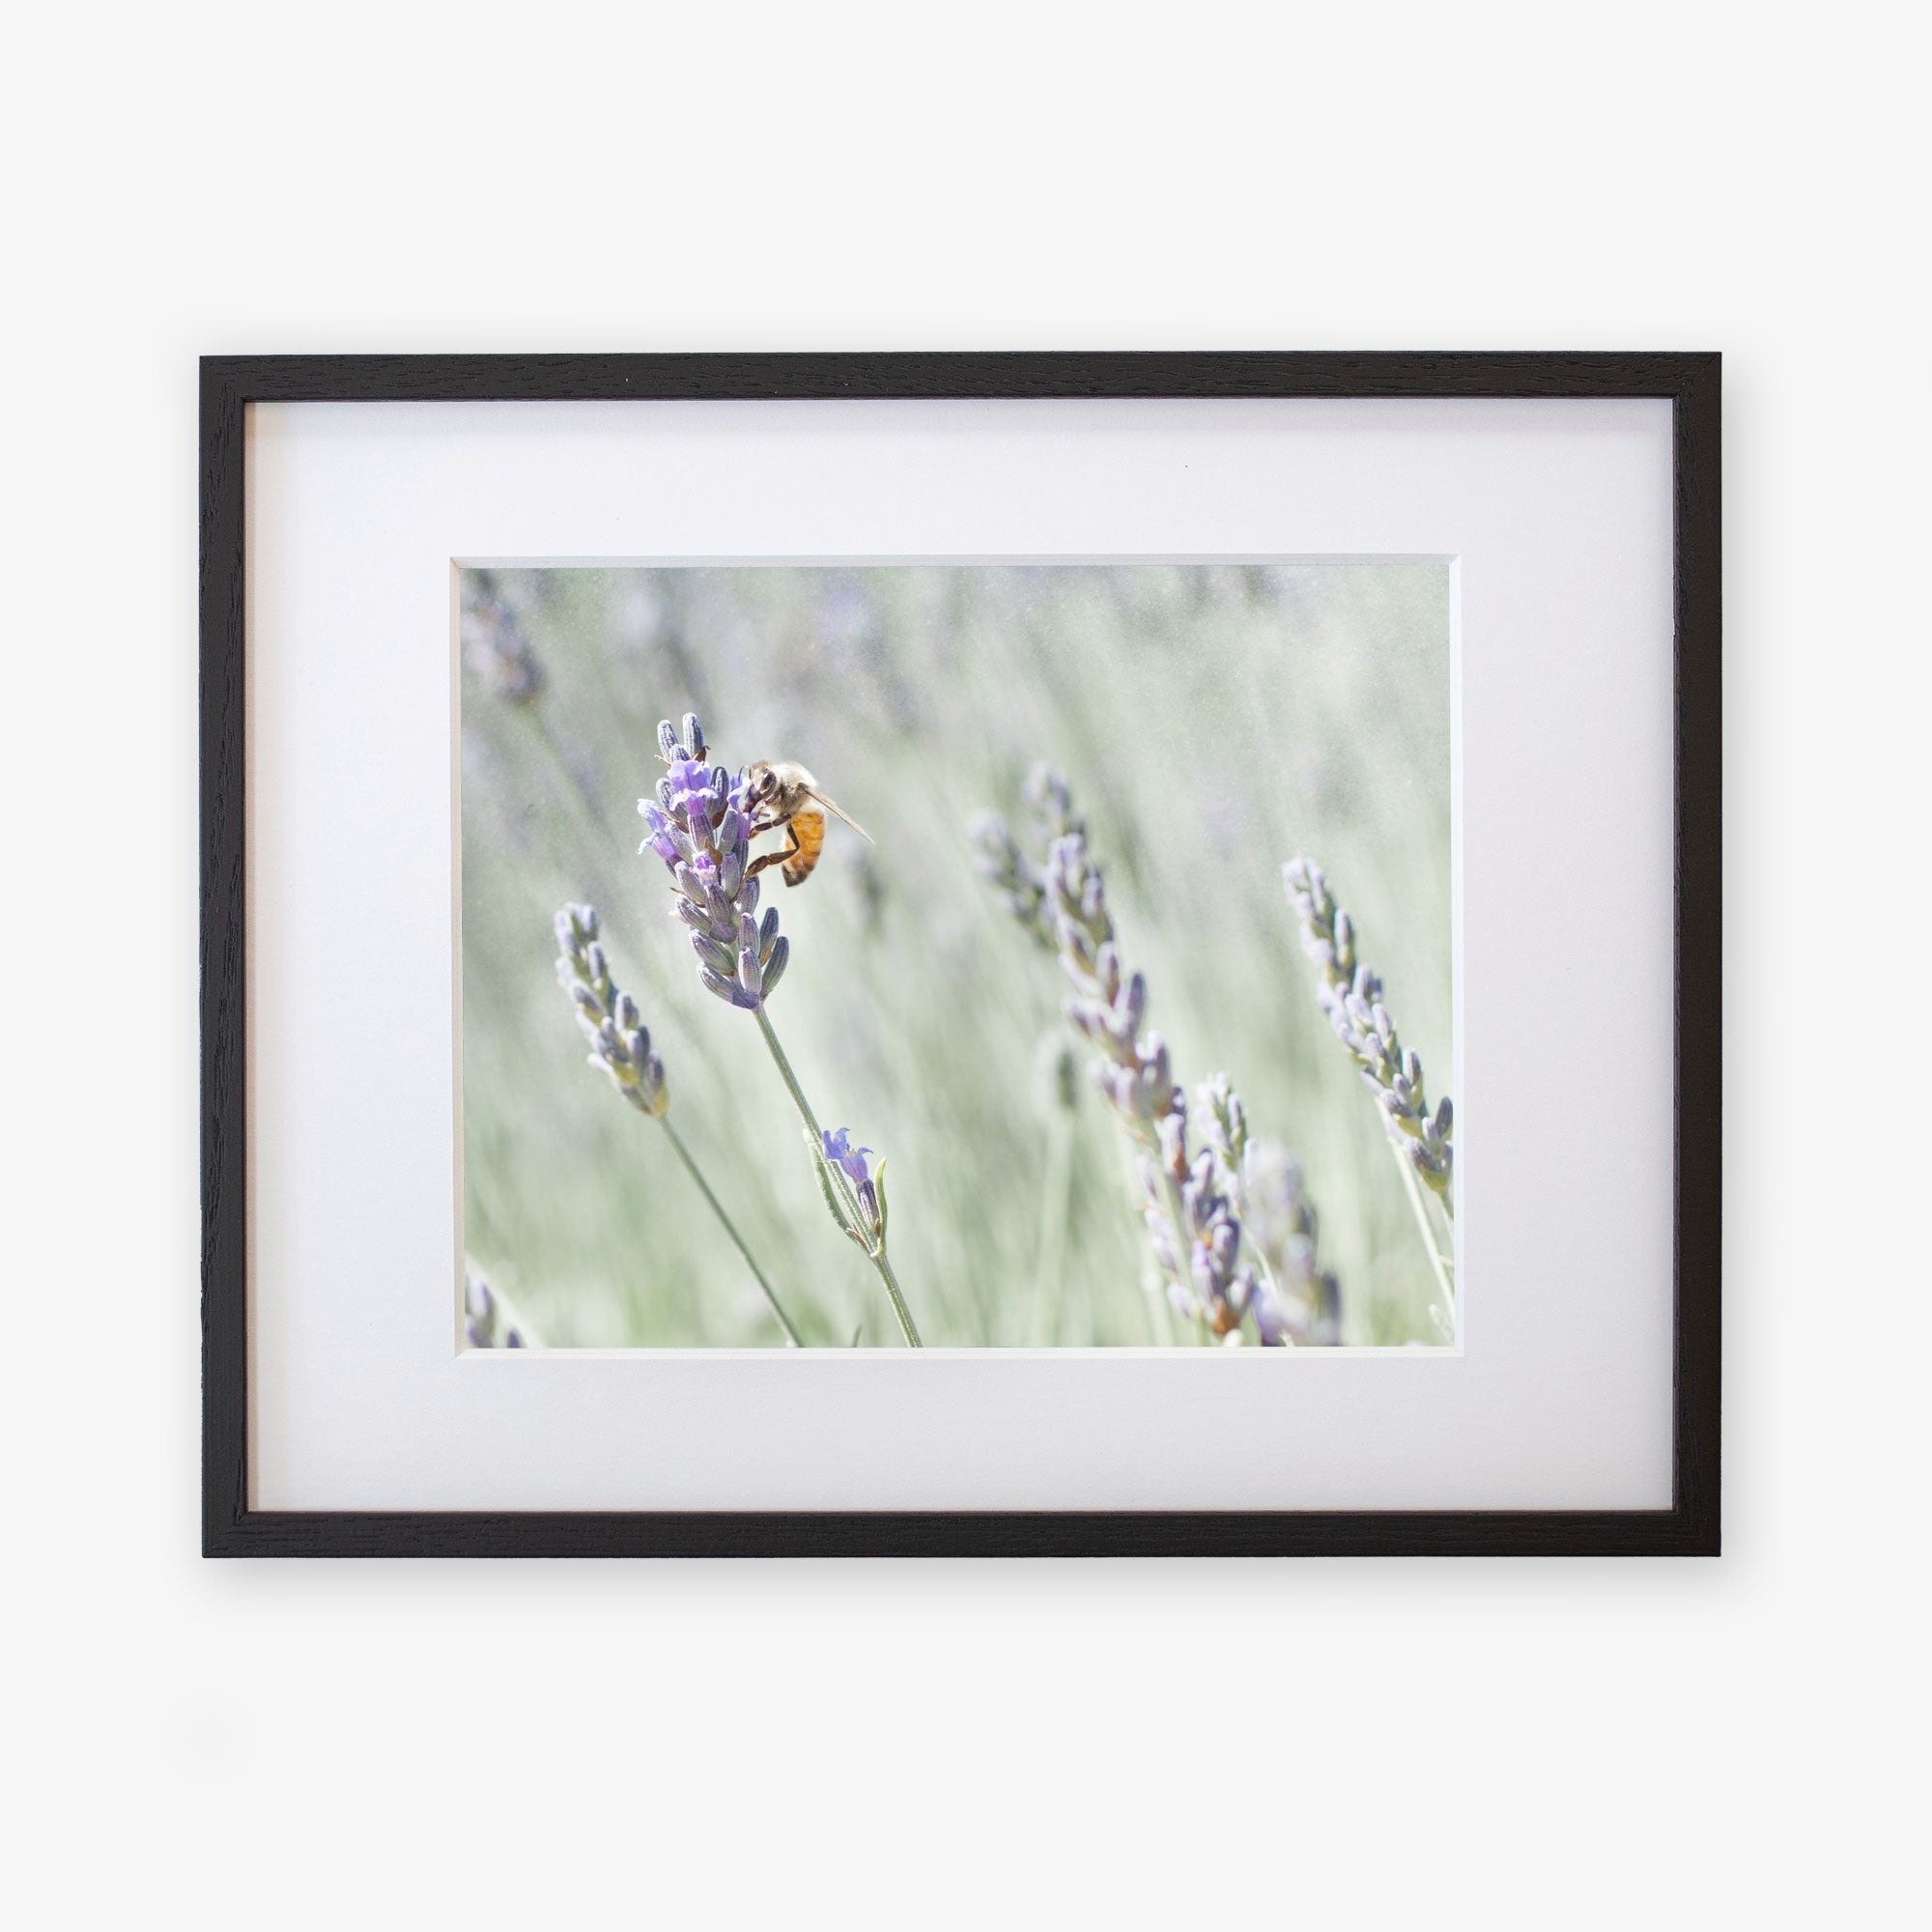 A framed photograph depicting a bee collecting nectar from purple lavender flowers on an archival photographic paper, with a soft-focus background highlighting the natural setting. This is the Rustic Floral Print, &#39;Lavender for Bees&#39; by Offley Green.